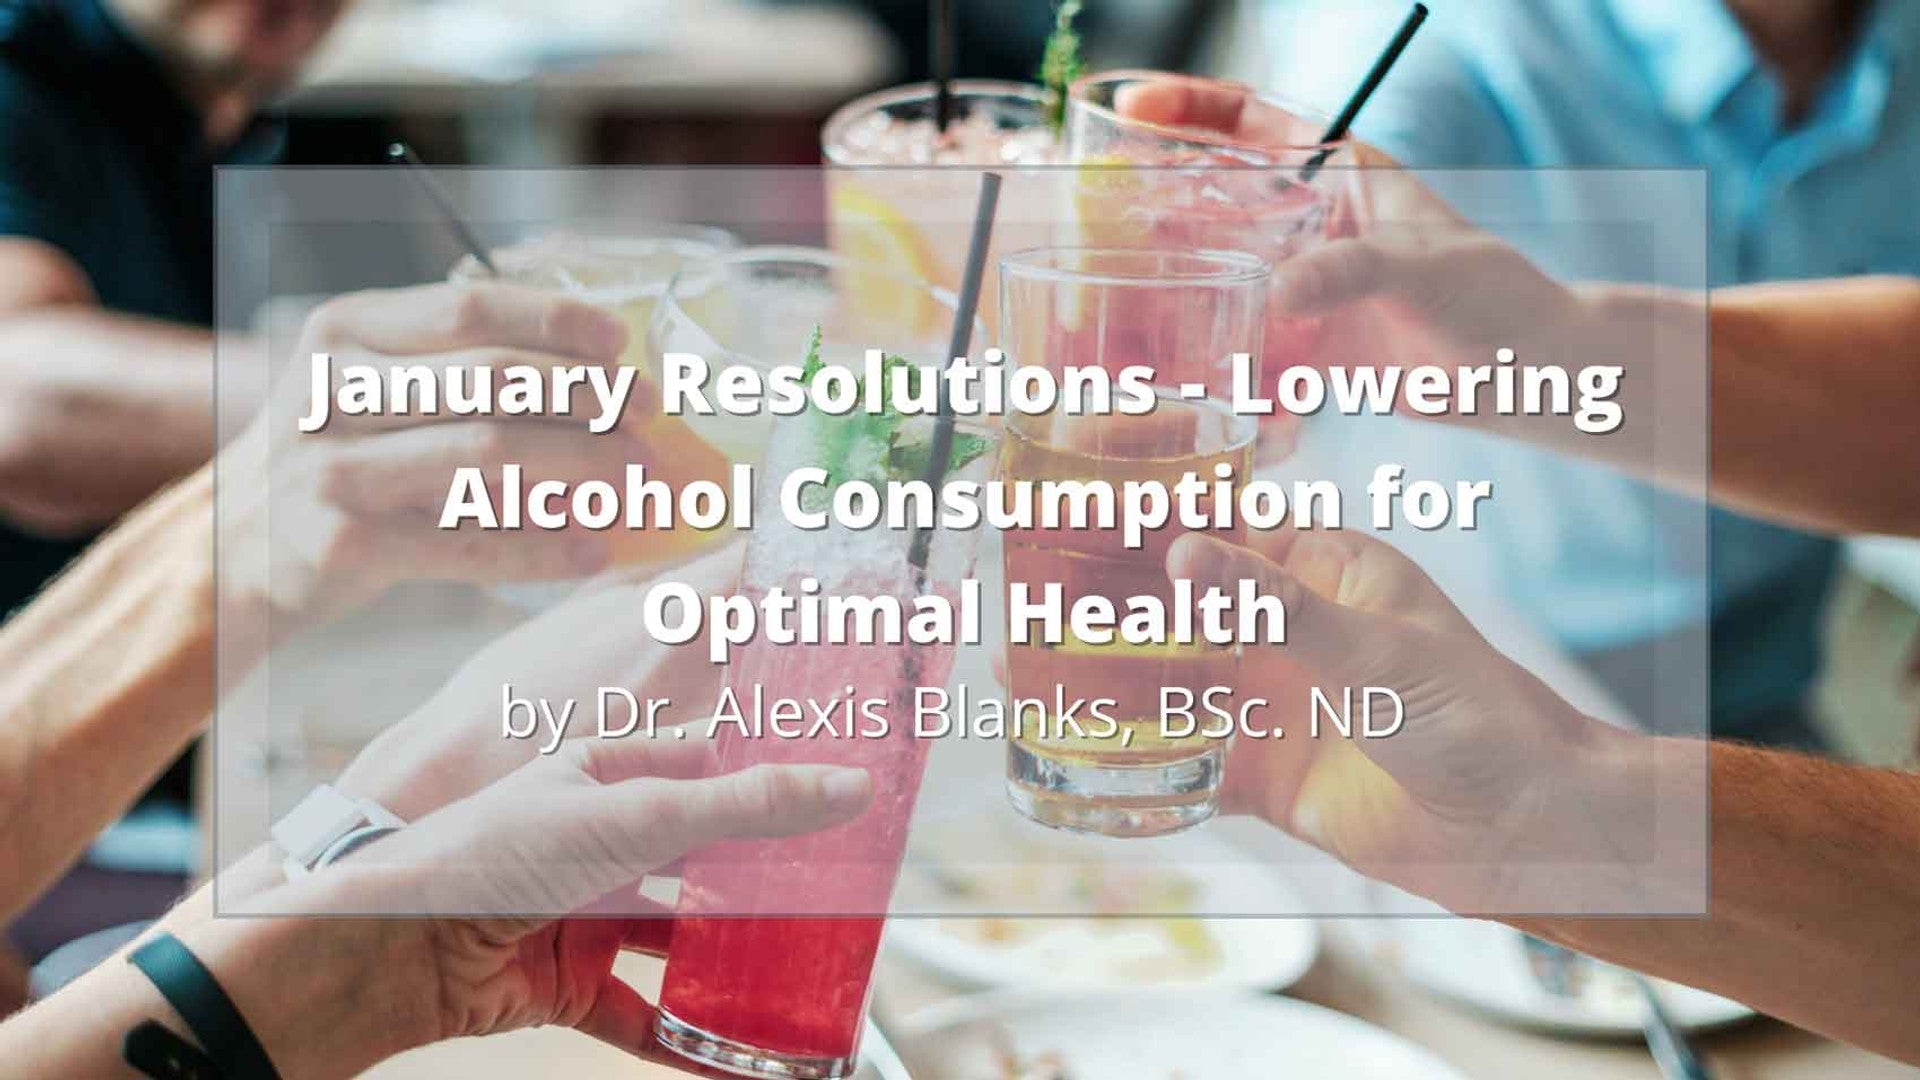 Lower Alcohol Consumption for Optimal Health